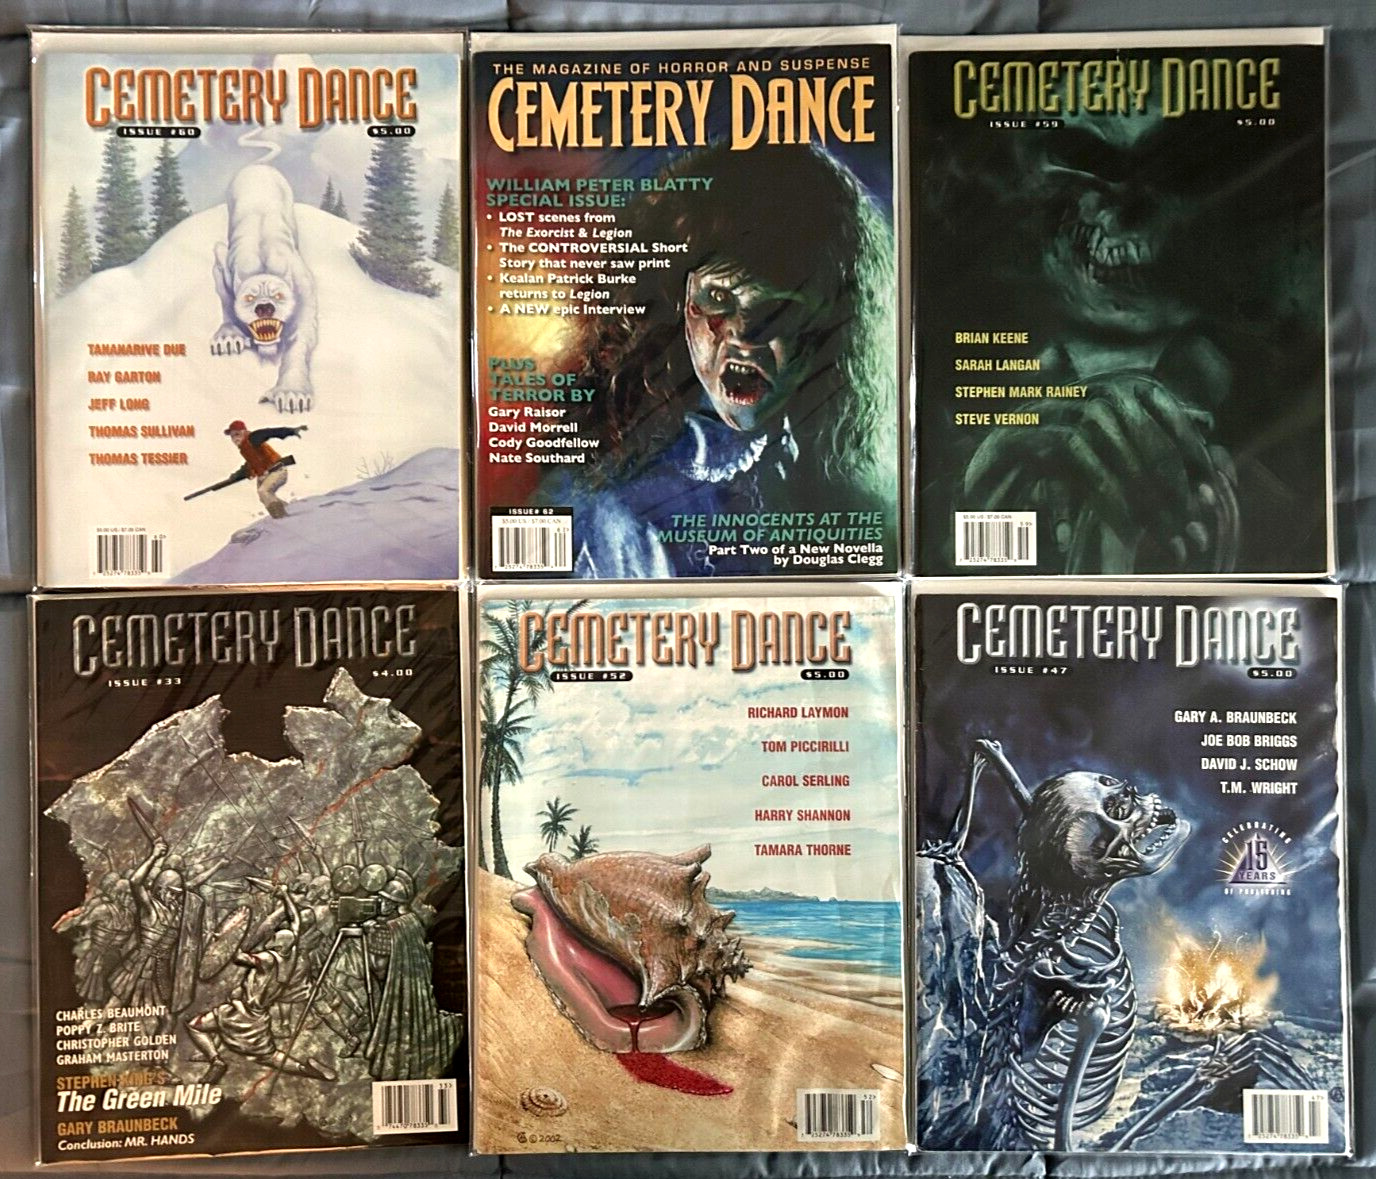 Lot of 6 Cemetery Dance Magazines - #33, #47, #52, # 59, #60 and #62